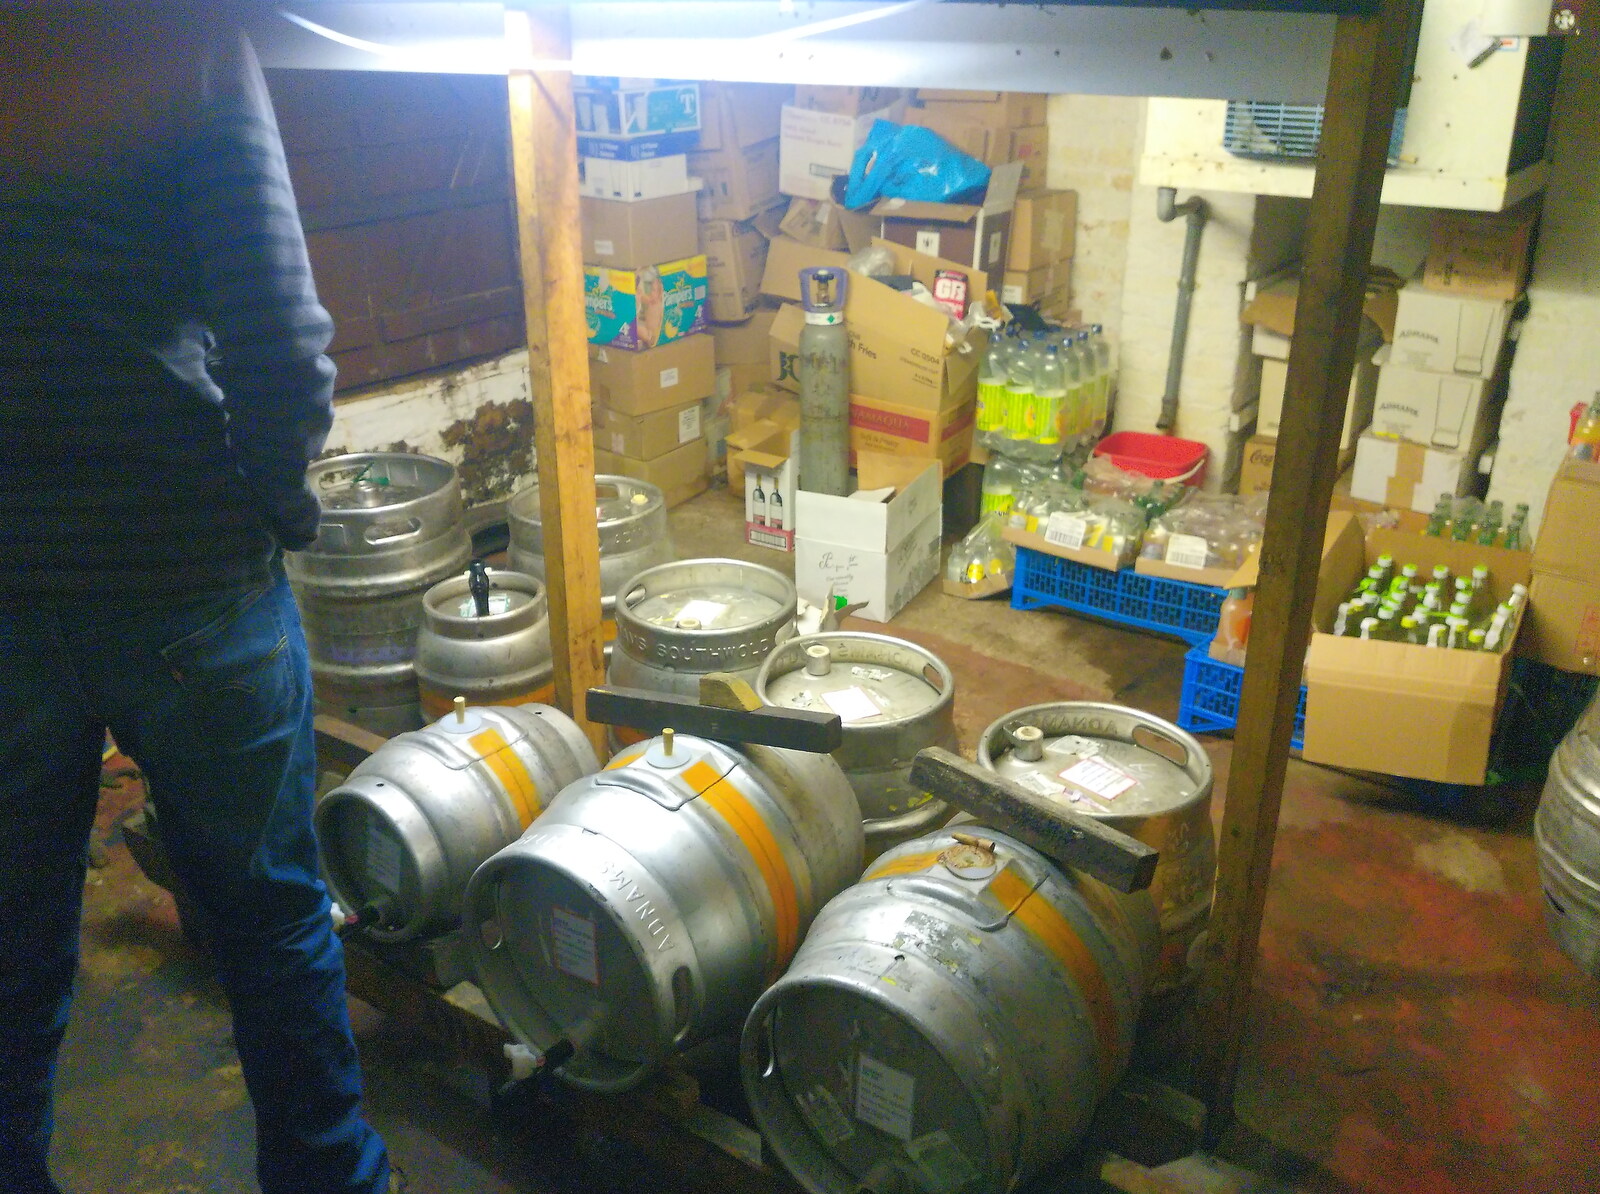 Beer barrels in the cellar from Tractor Rides and Pub Cellars, Brome, Suffolk - 29th October 2016